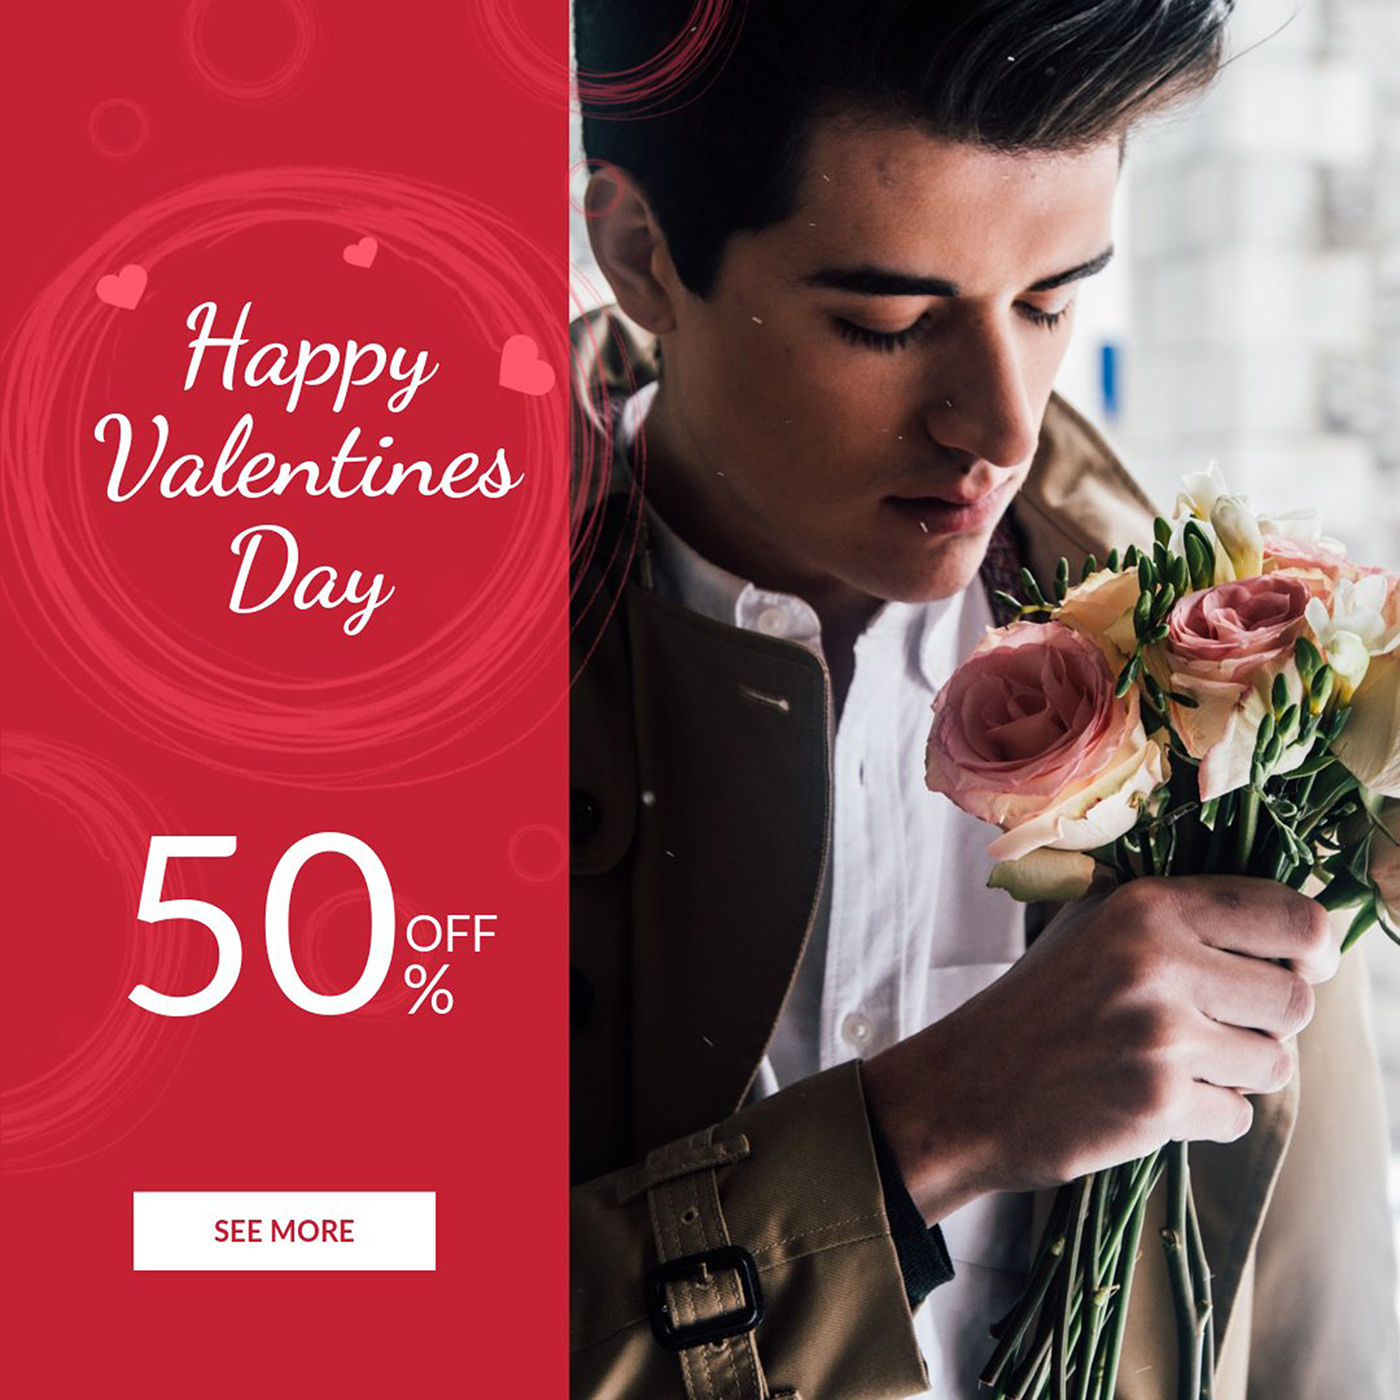 valentines day meaning valentines day history valentines day quotes movie valentines day ideas valentines day gifts background valentines day wallpaper